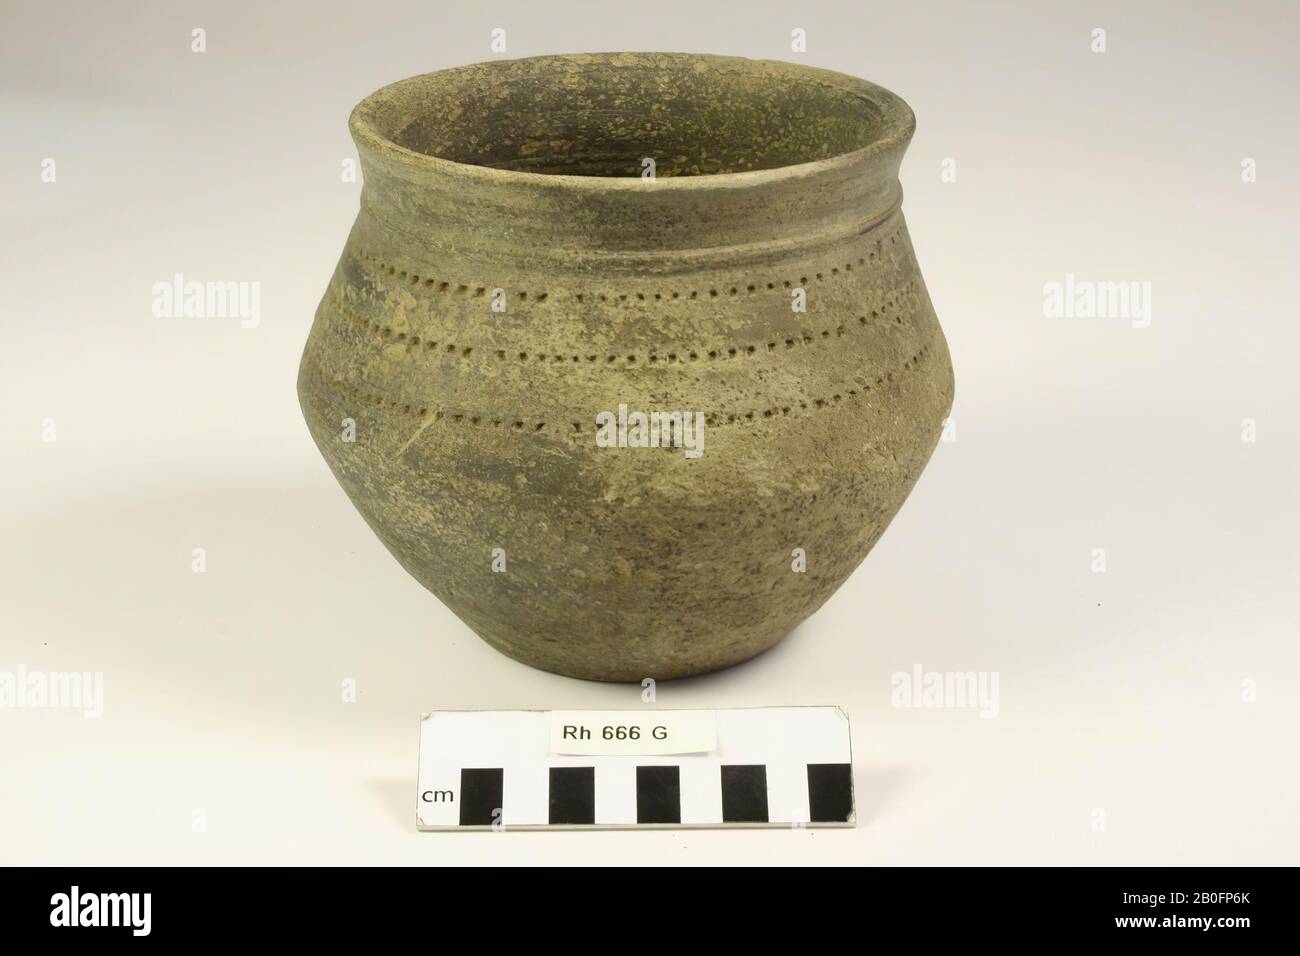 Knuckle jar of smooth-walled, Frankish earthenware, concave Stock Photo